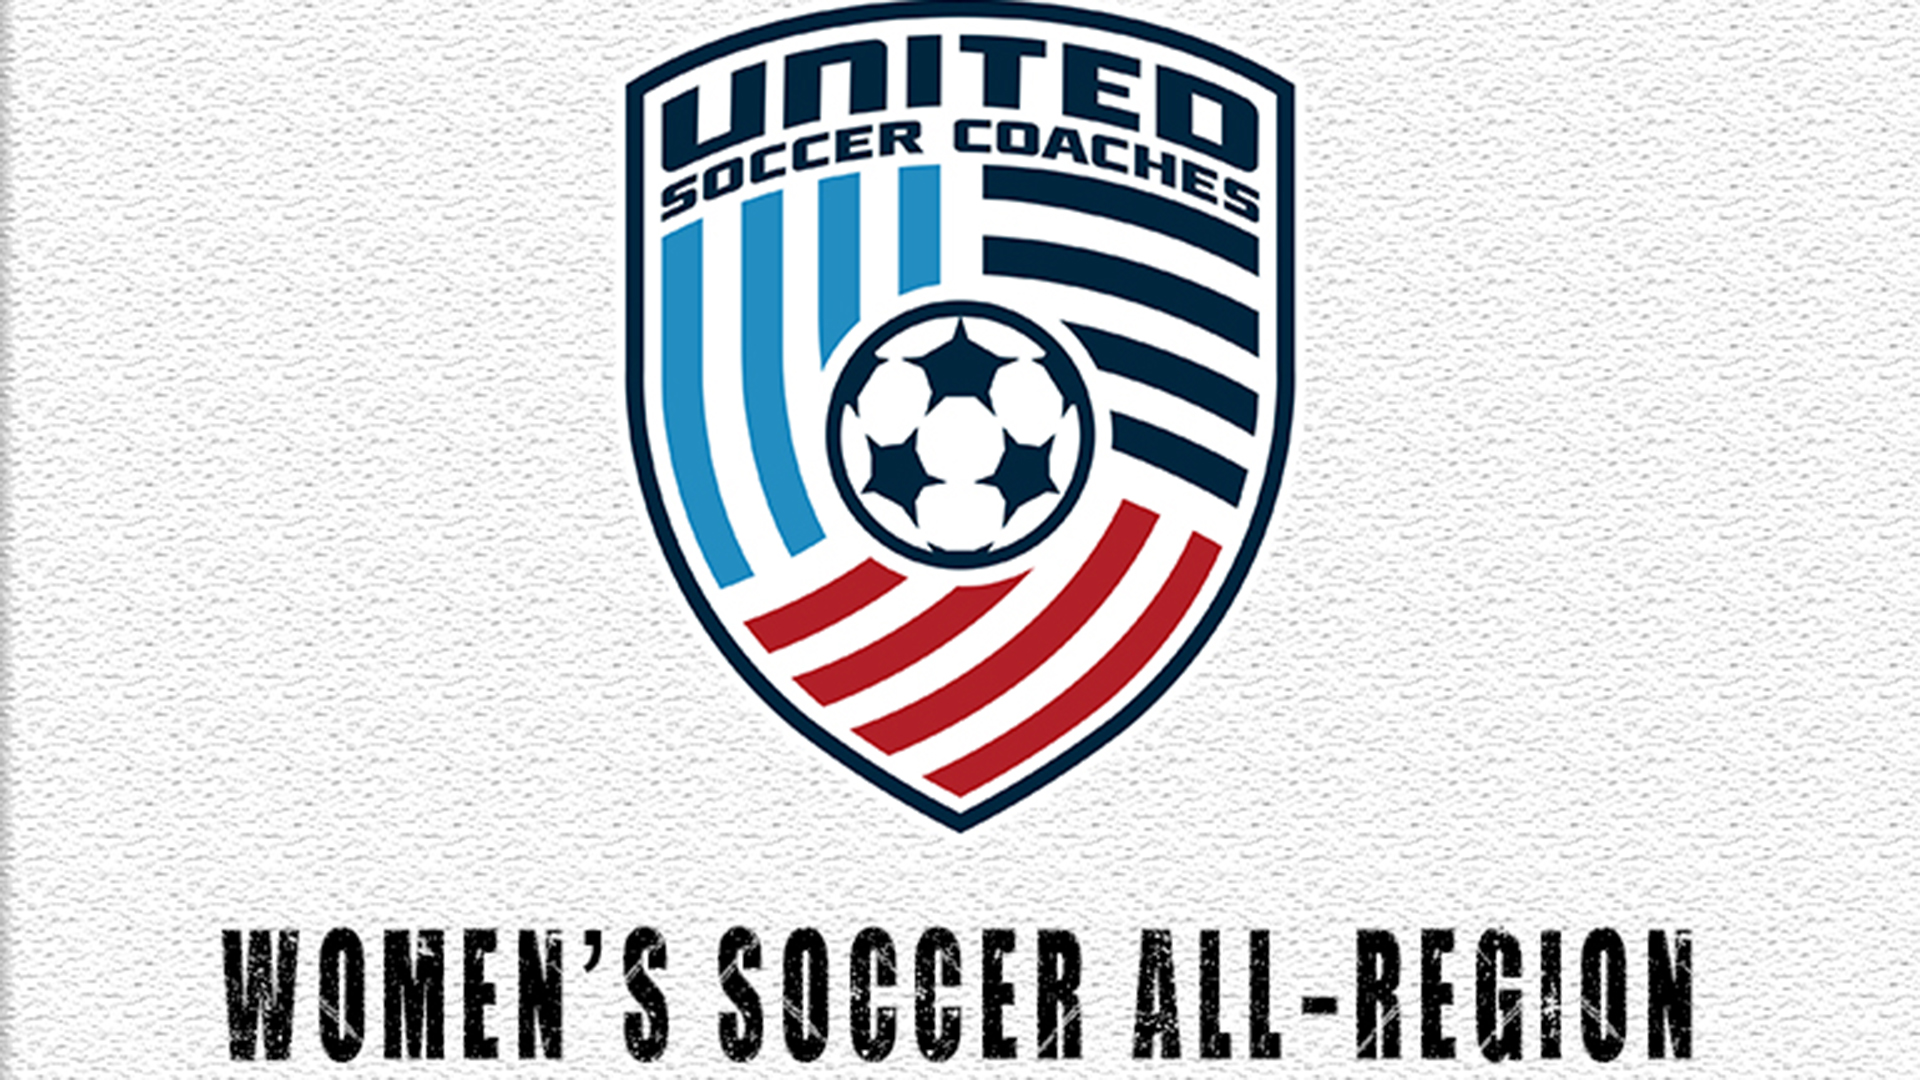 19 Secure All-Region Accolades